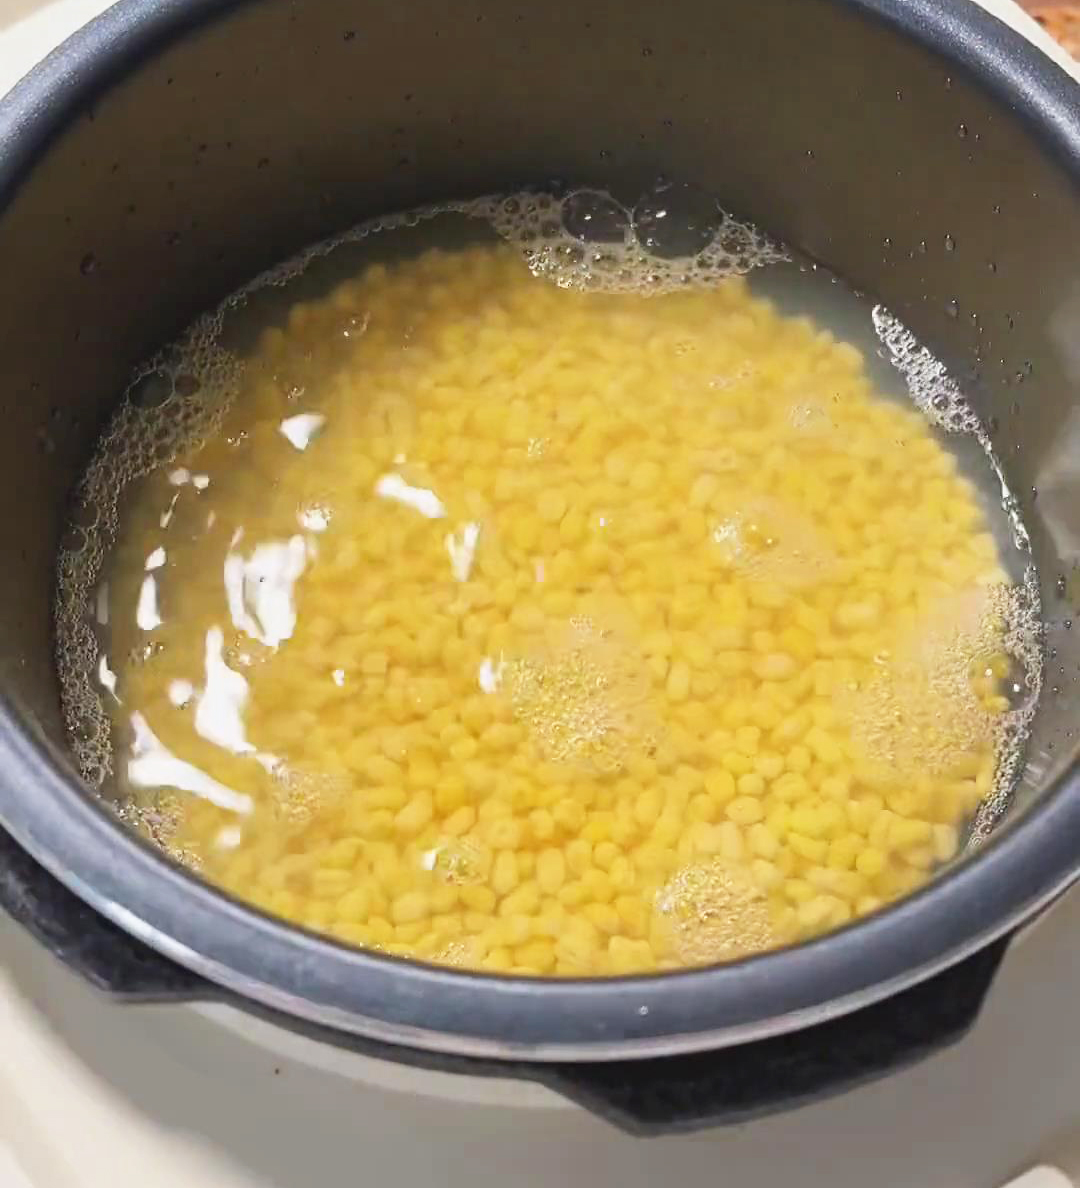 Cook the peeled mung beans in a rice cooker